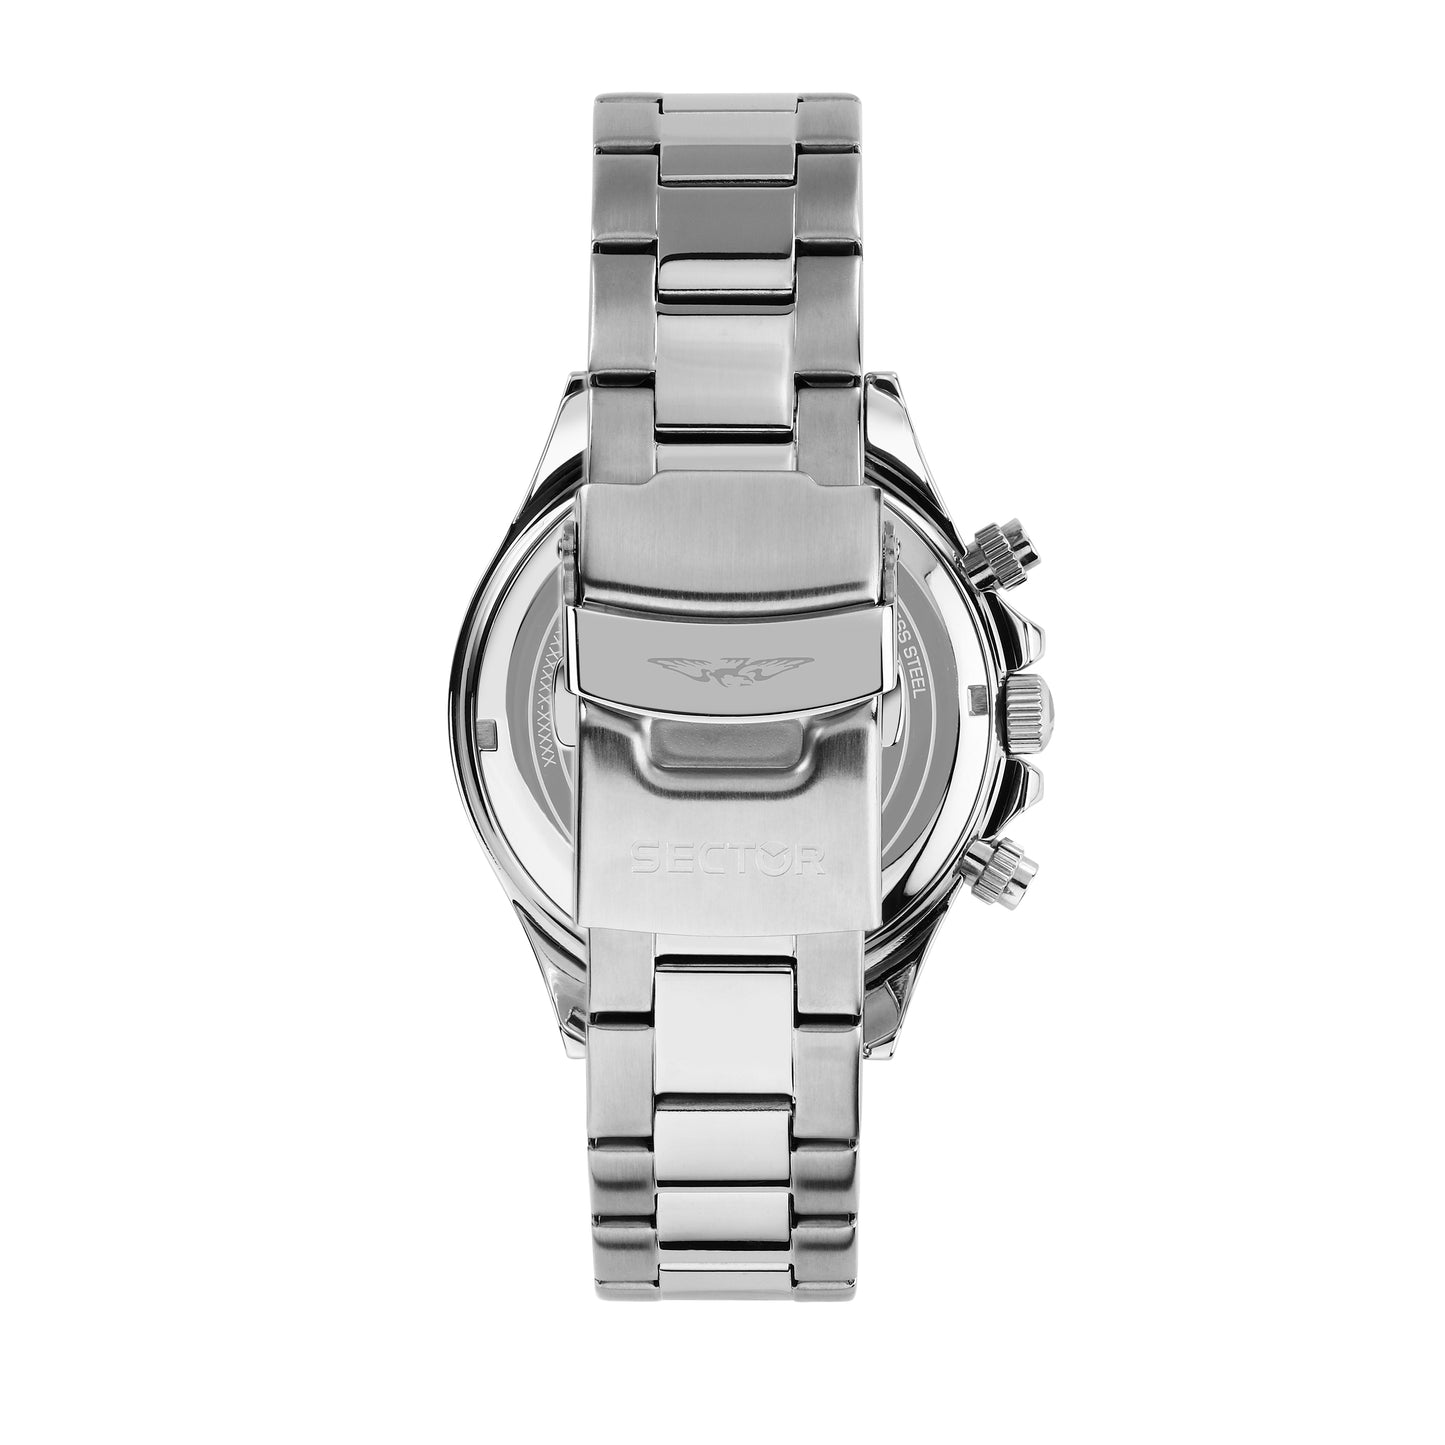 MONTRE HOMME SECTOR 230 R3273661036